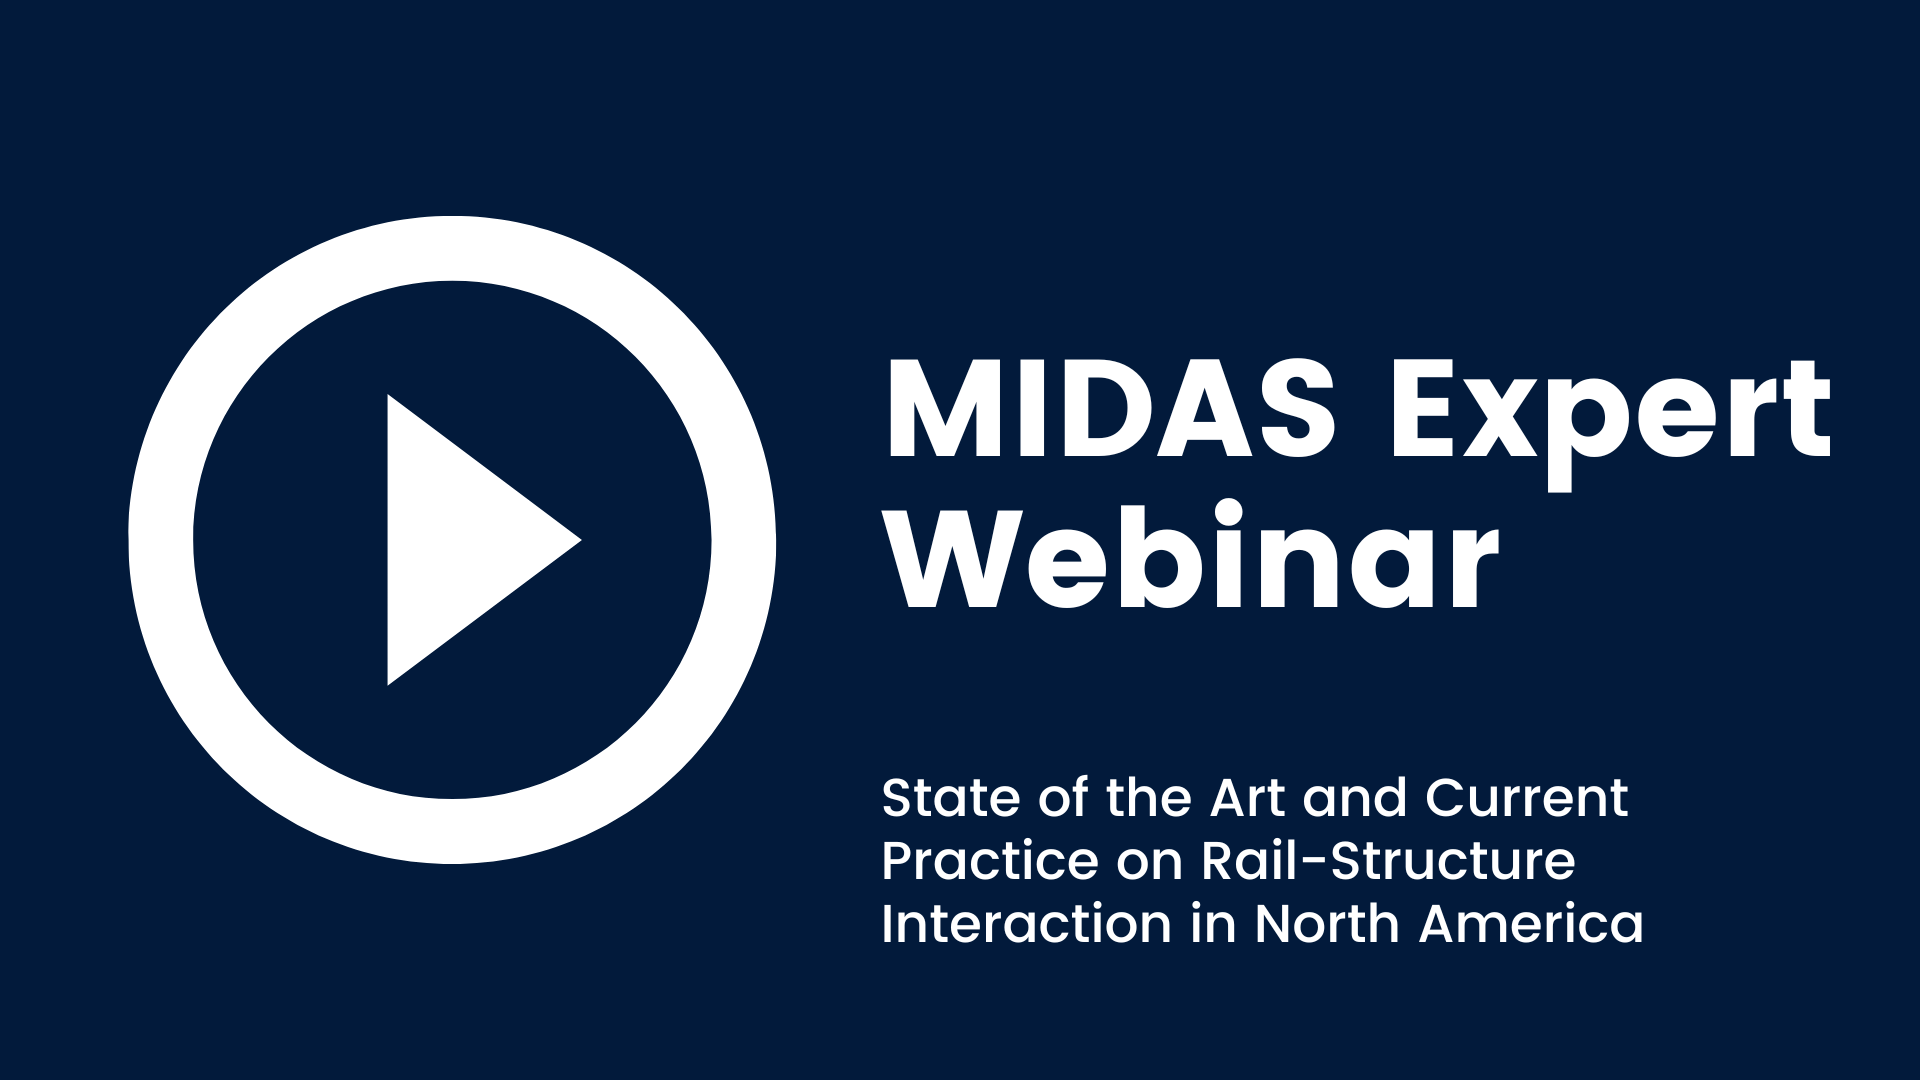 Webinar: State of the Art and Current Practice on Rail-Structure Interaction in North America